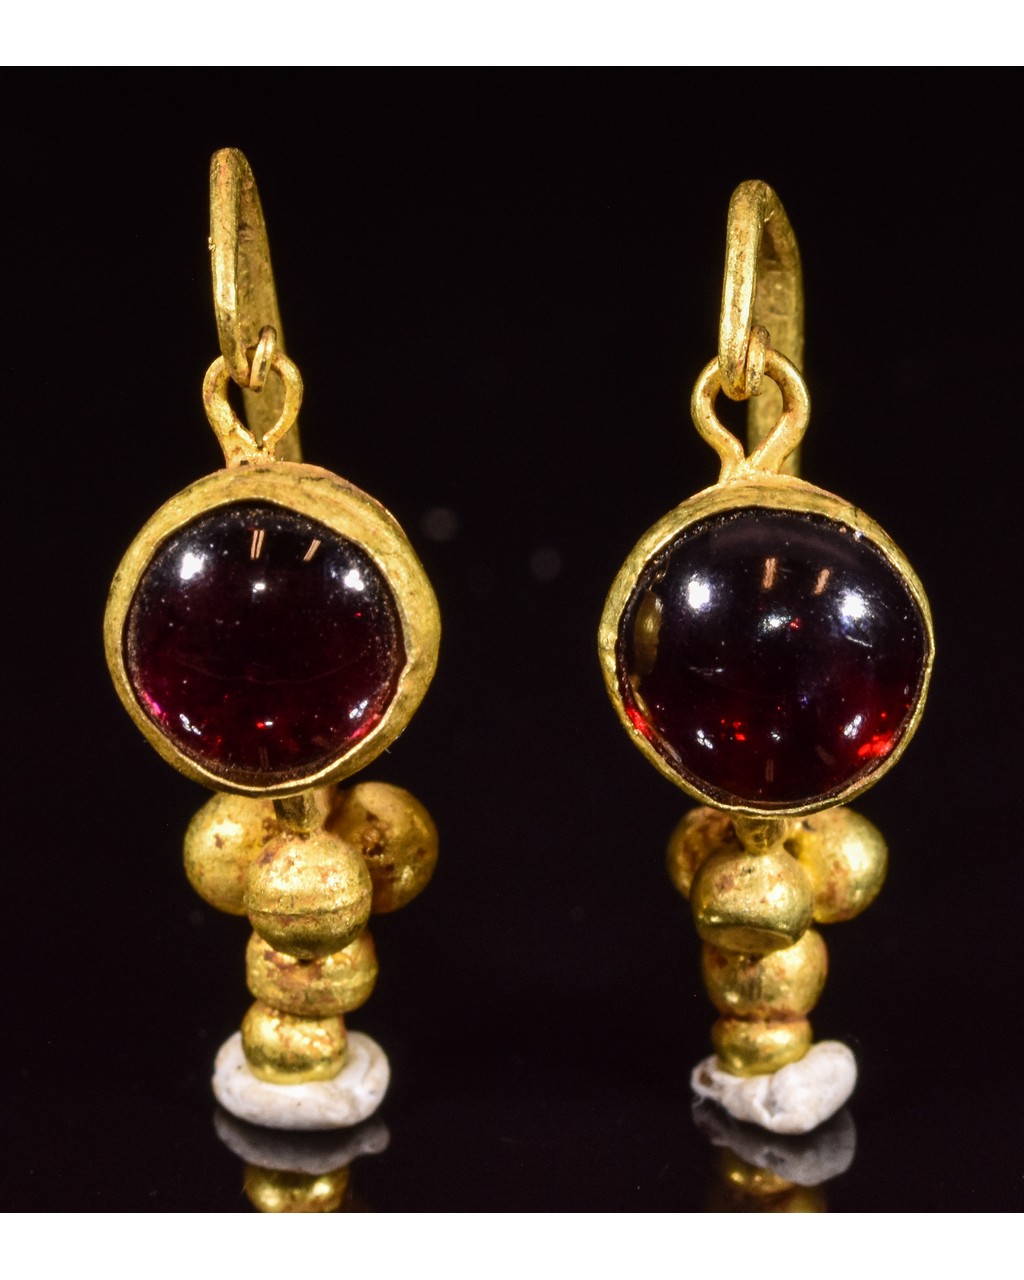 PAIR OF ROMAN GOLD EARRINGS WITH GARNETS